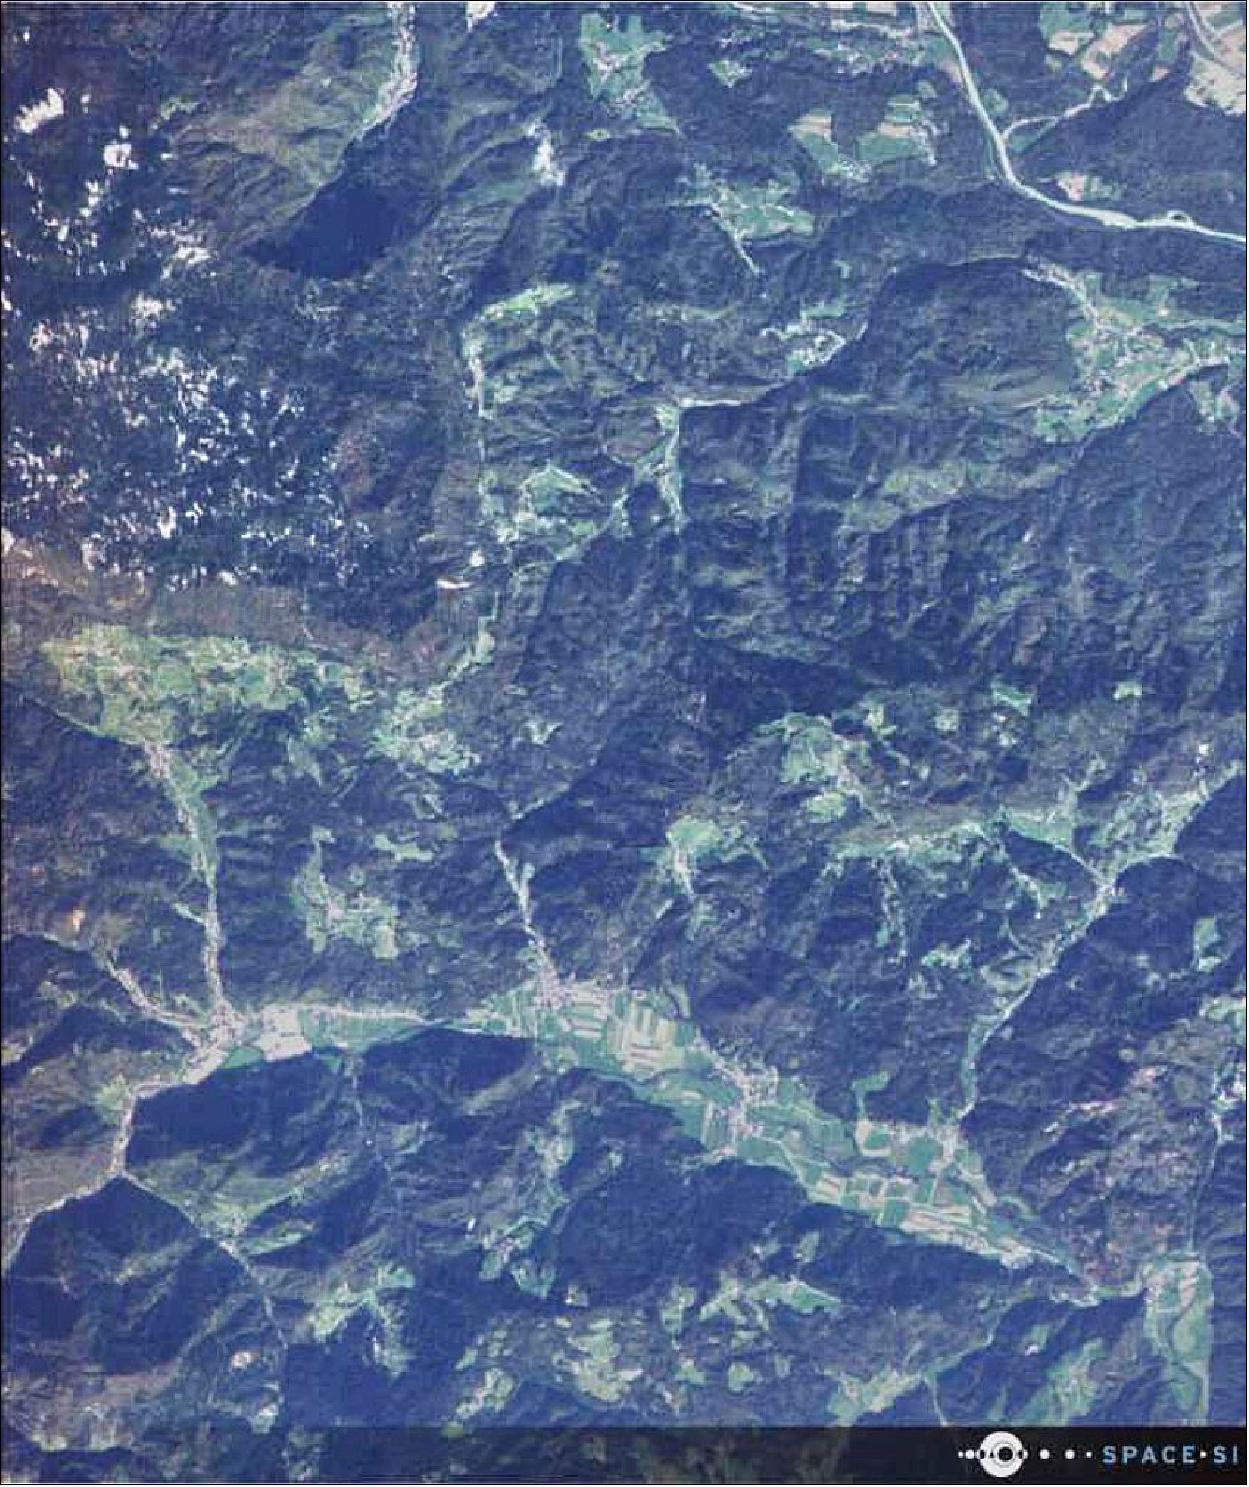 Figure 16: Multispectral image captured over Slovenia during commissioning phase of NEMO-HD which was launched September 2, 2020 (image credit: Space-SI)